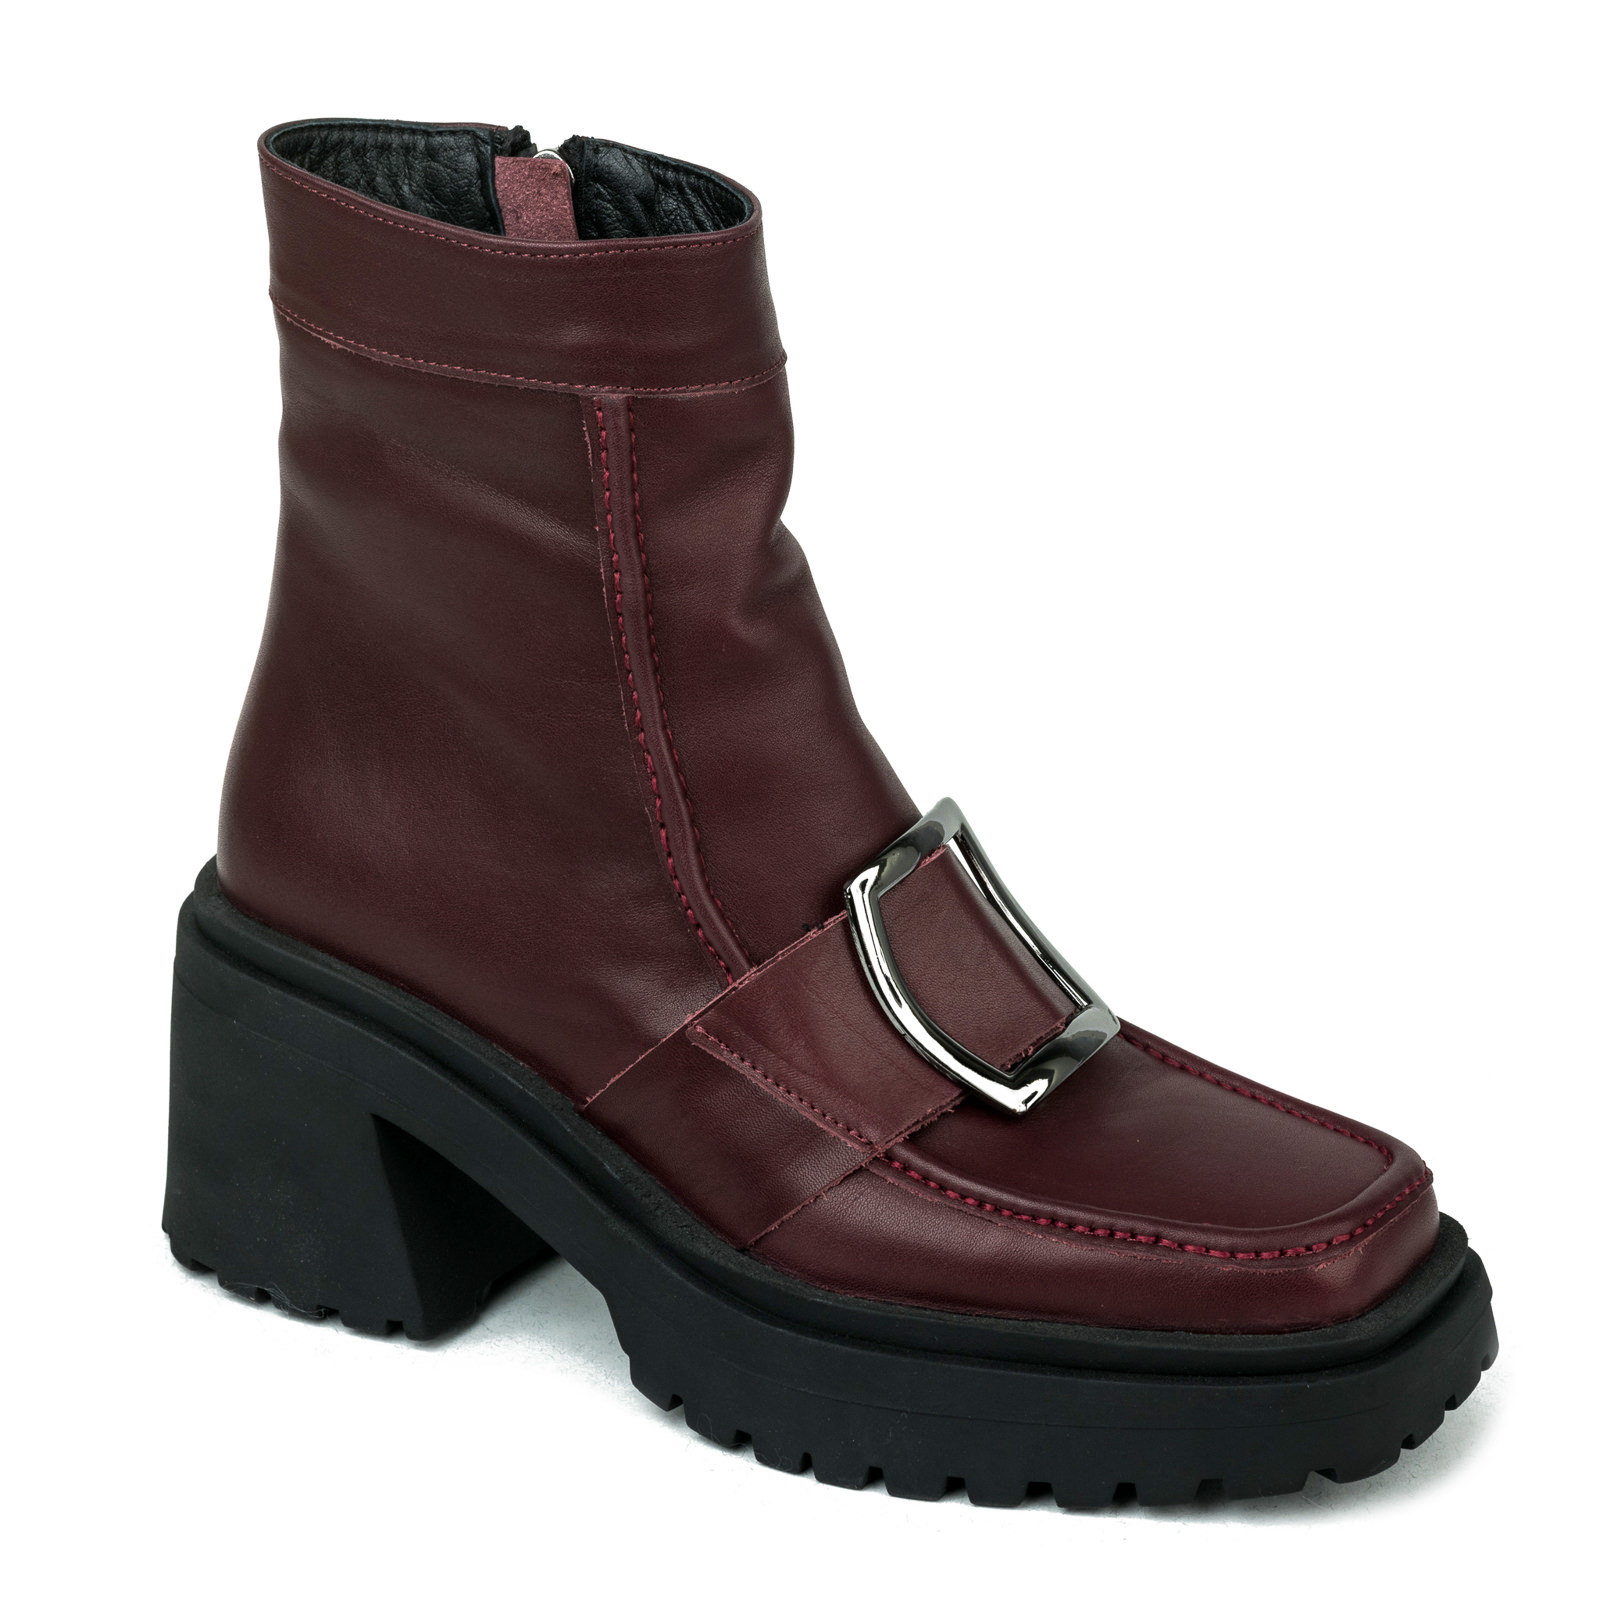 Leather ankle boots B084 - WINE RED